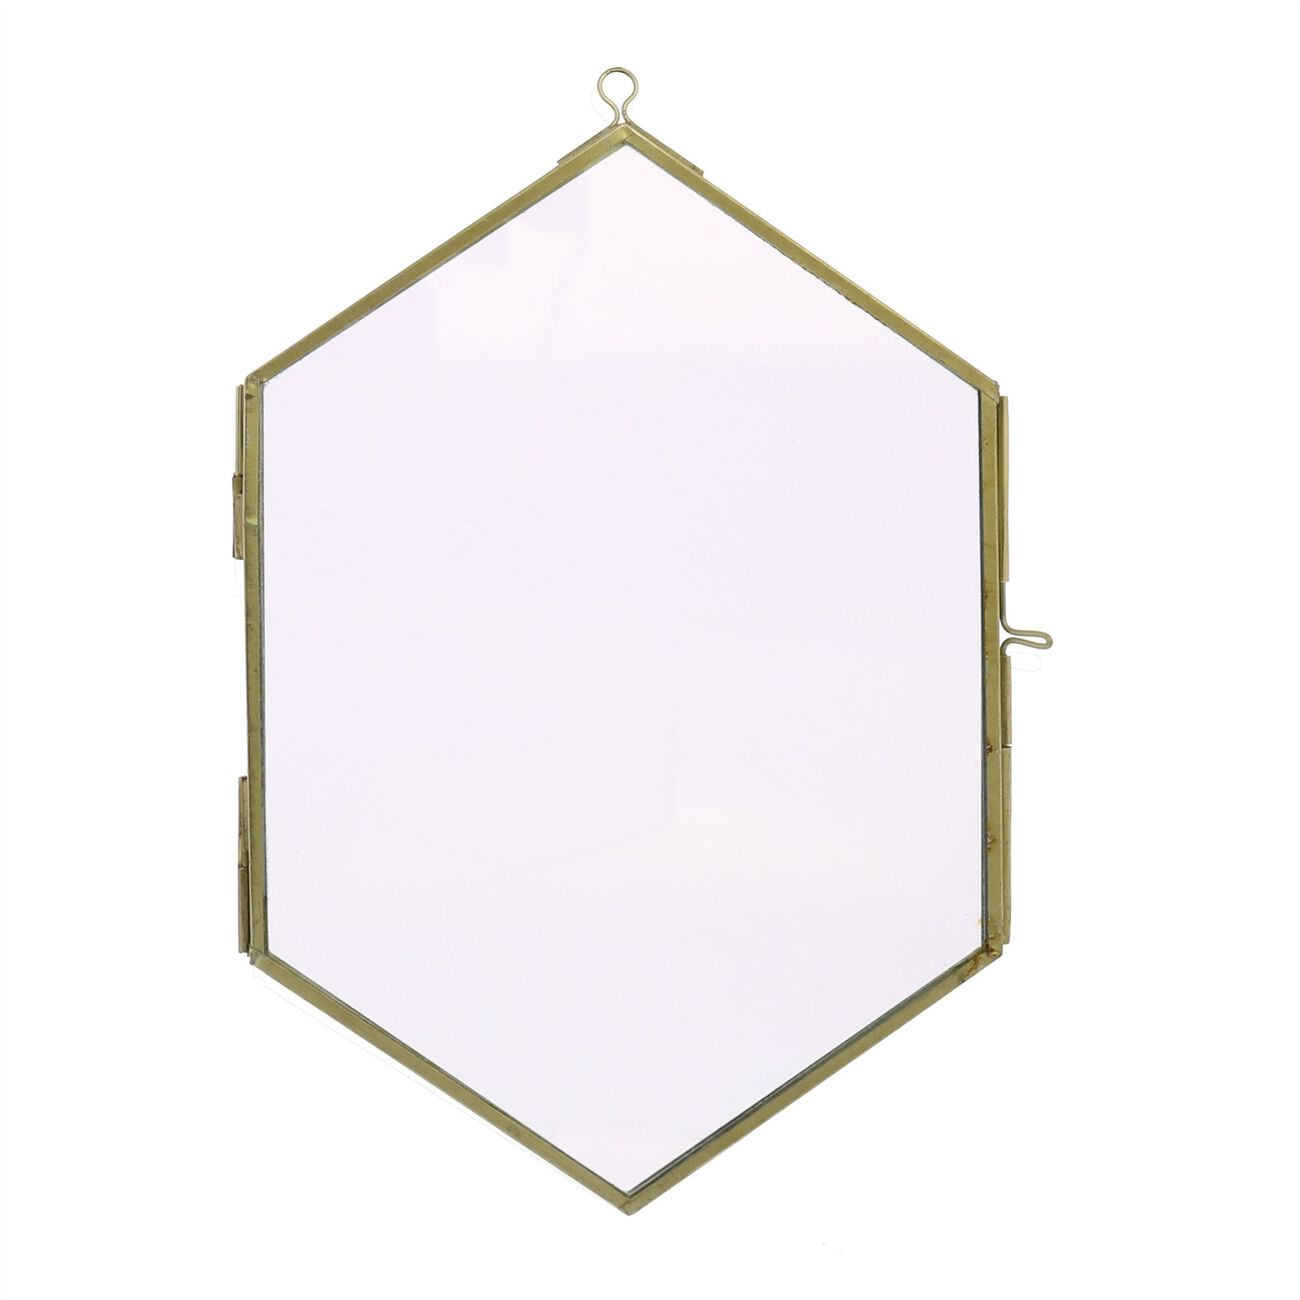 Metal Hexagonal Wall Frame with Mounting Hardware, Small, Brass